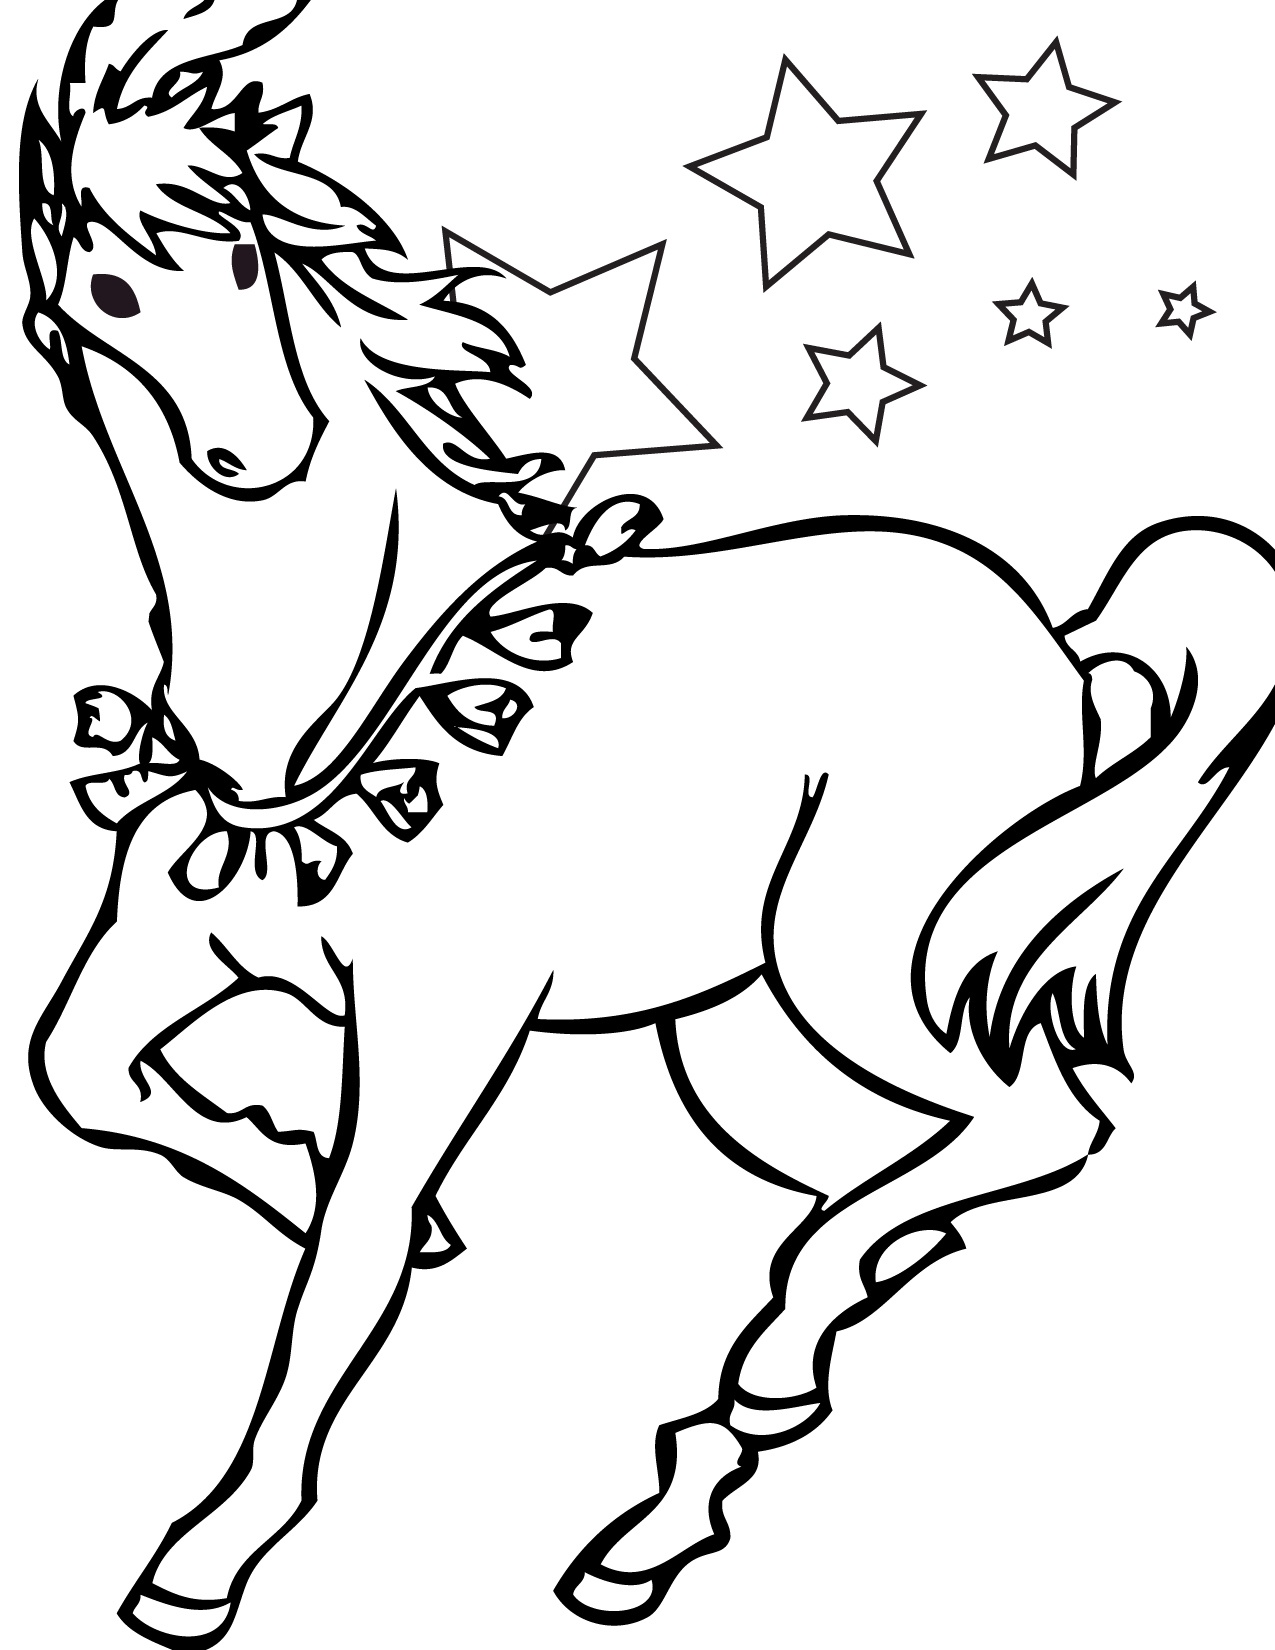 Free Printable Horse Coloring Pages For Kids - Free Printable Horse Coloring Pages